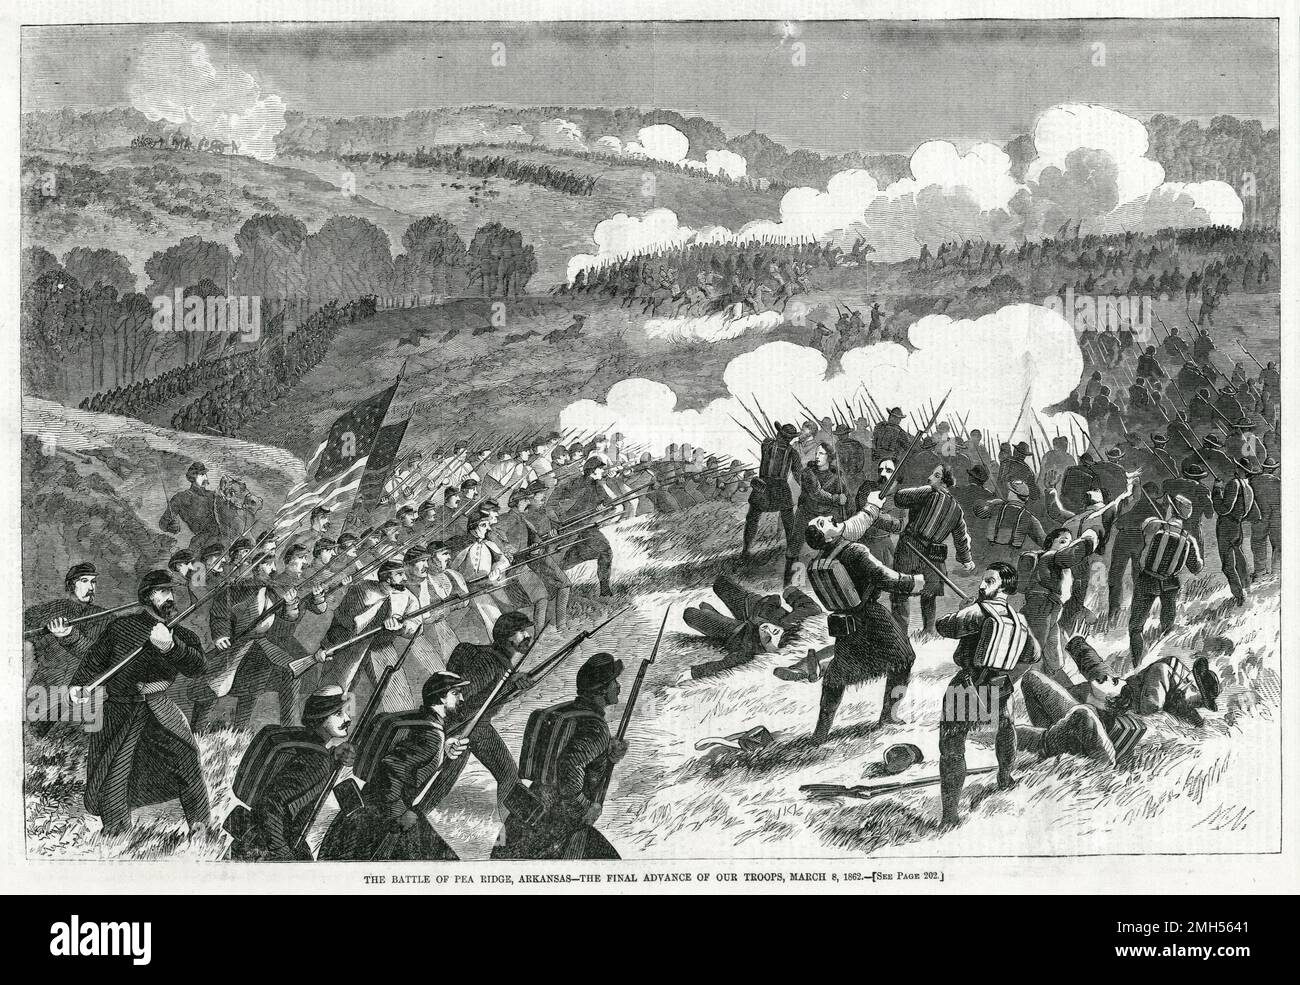 The Battle of Pea Ridge (the Battle of Elkhorn Tavern) was a battle in the American Civil War fought on 7-8th March 1862 in Arkansas. The assault was under the command of Samuel Curtis, and it was a Unionist victory. The image depicts the final advance of Unionist troops. Stock Photo